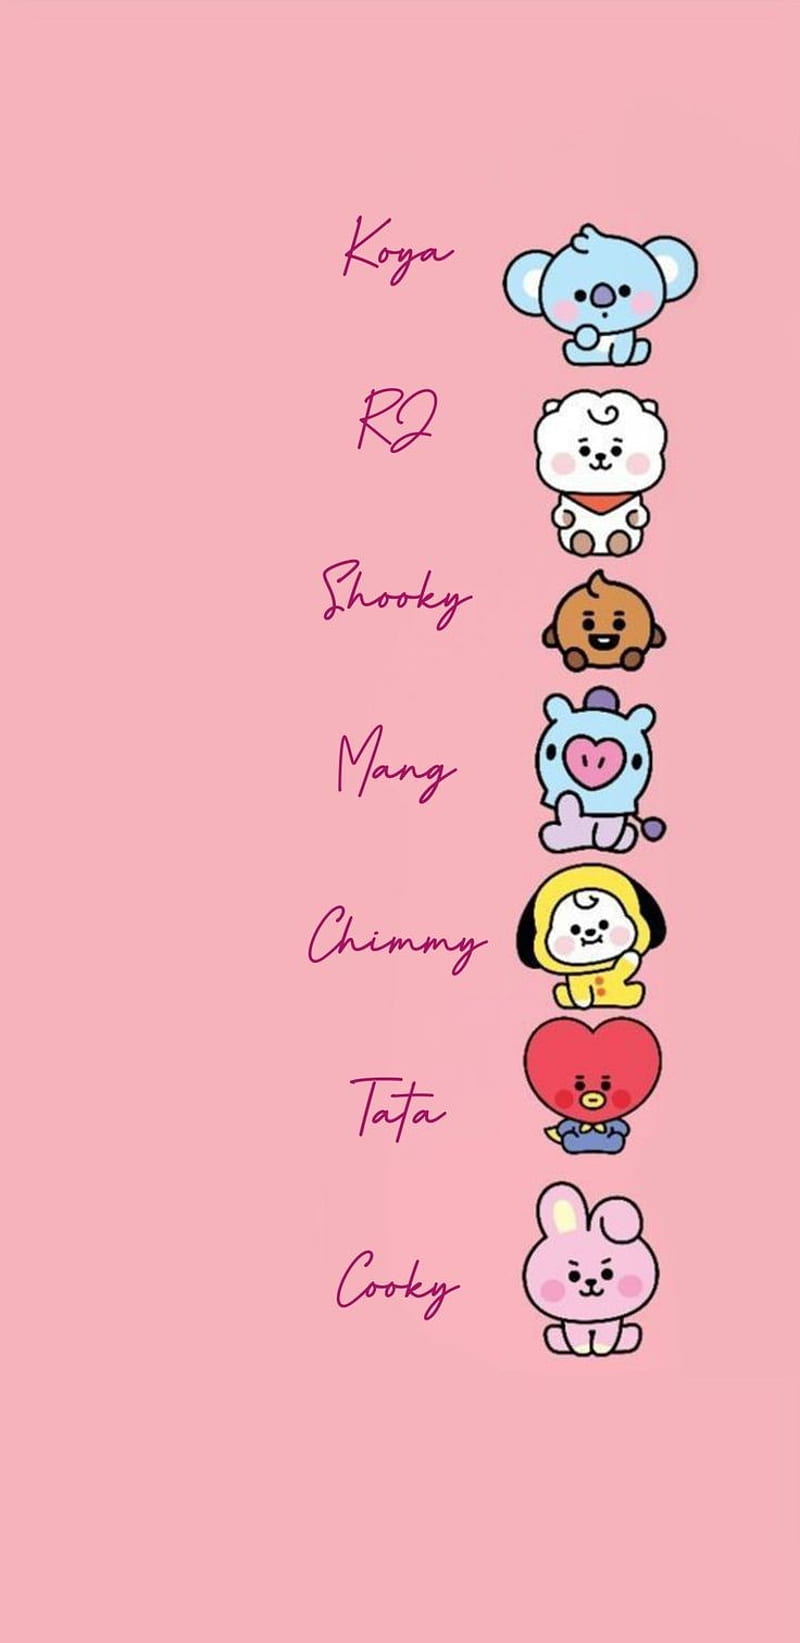 Bt21 Vector Art Icons and Graphics for Free Download